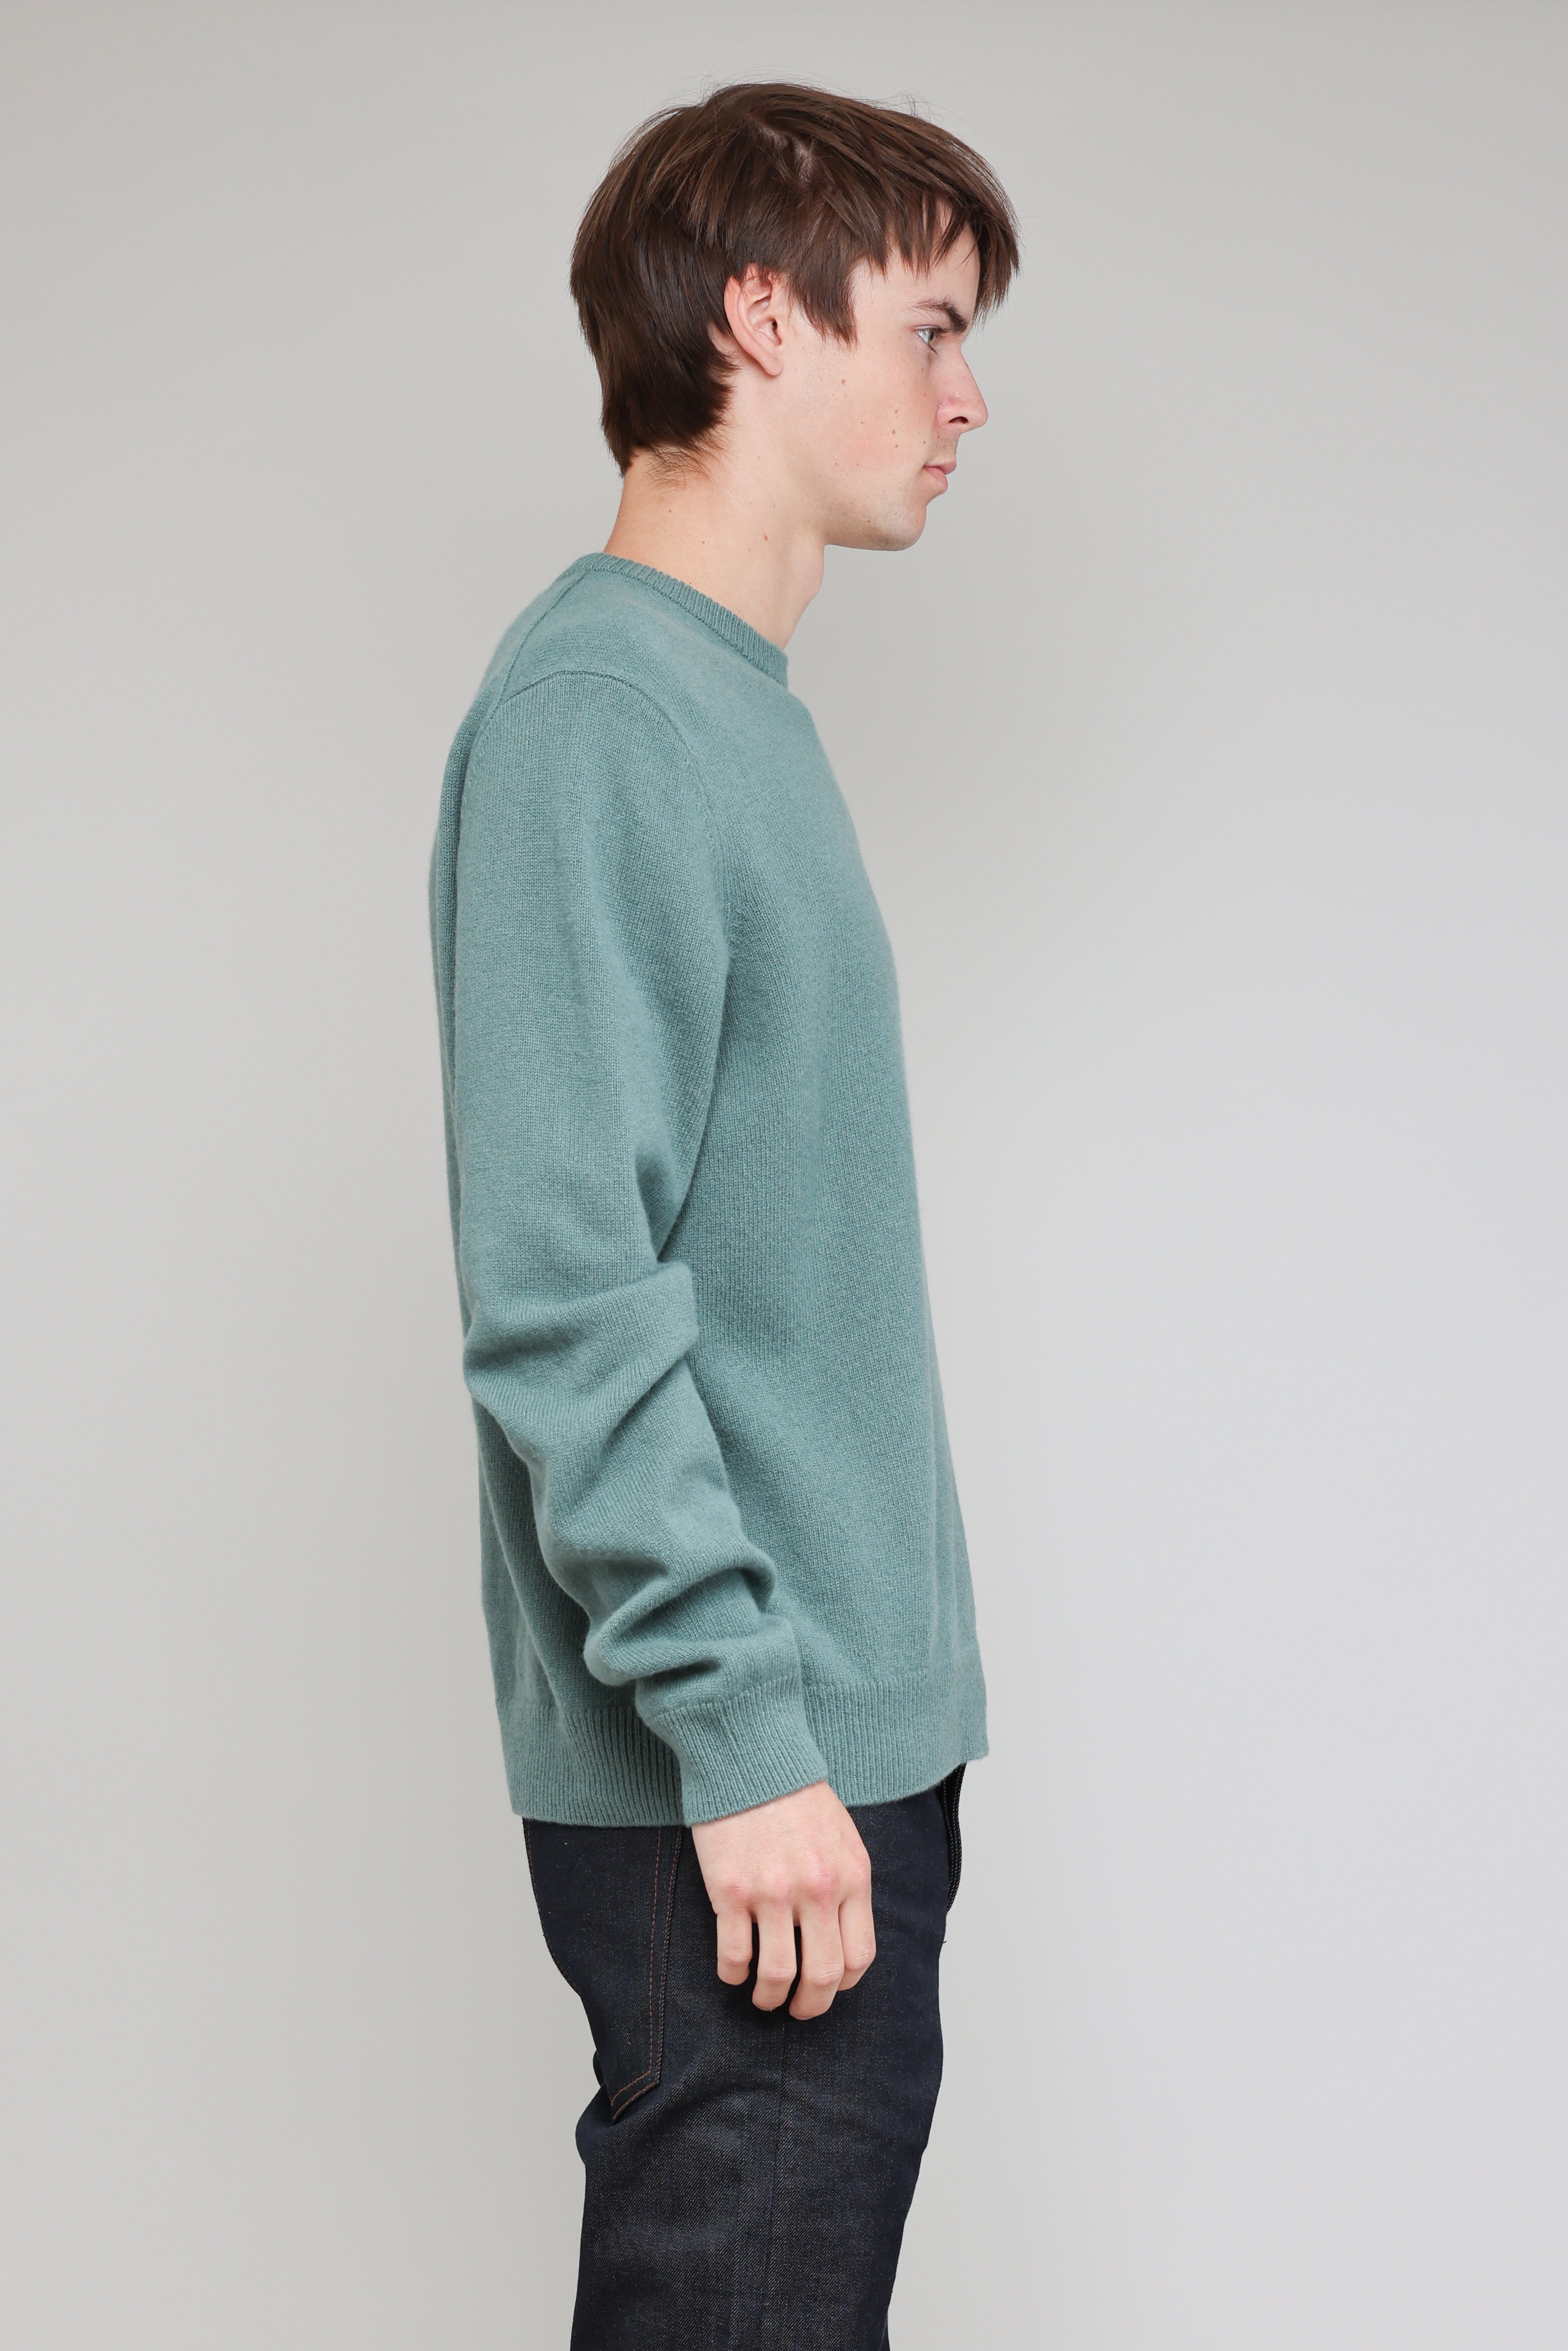 New Wool Crew in Pine 03